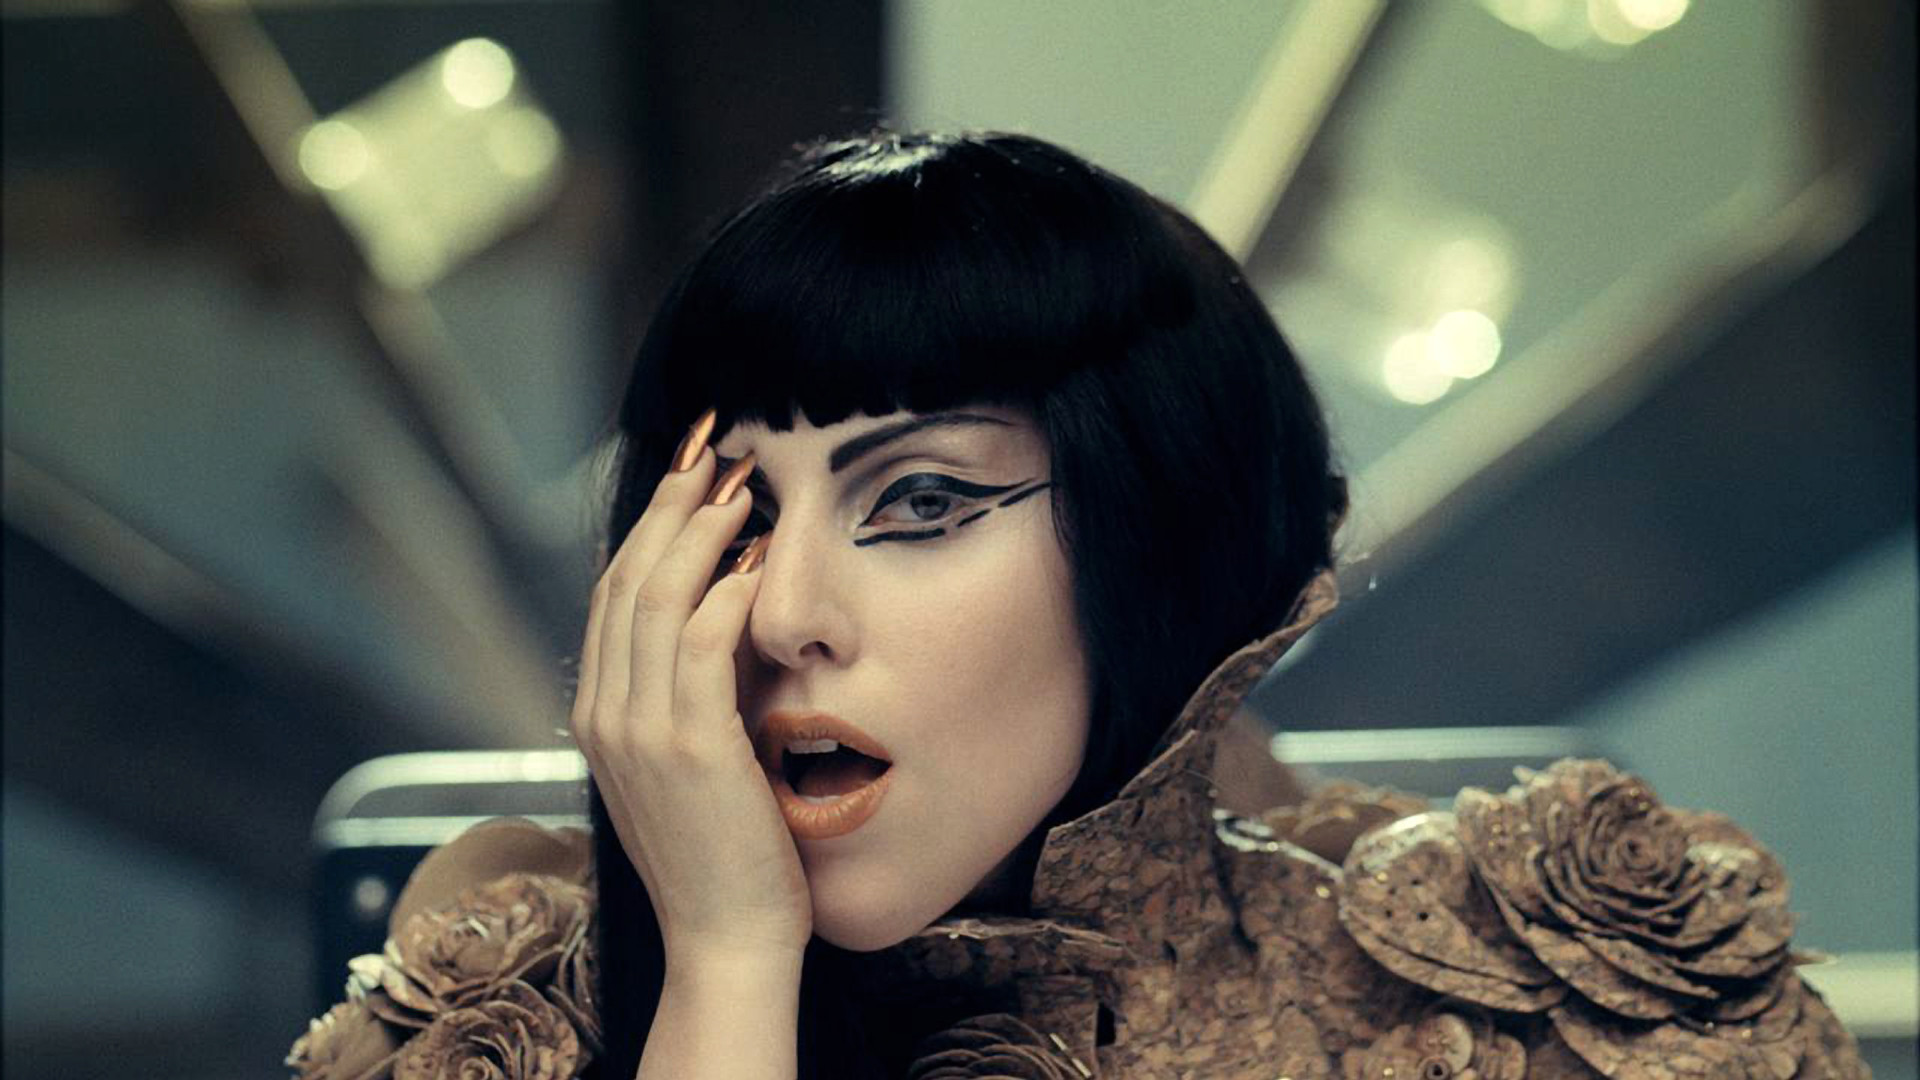 1920x1080 you_n_i___lady_gaga_preview_1_by_cocooh-